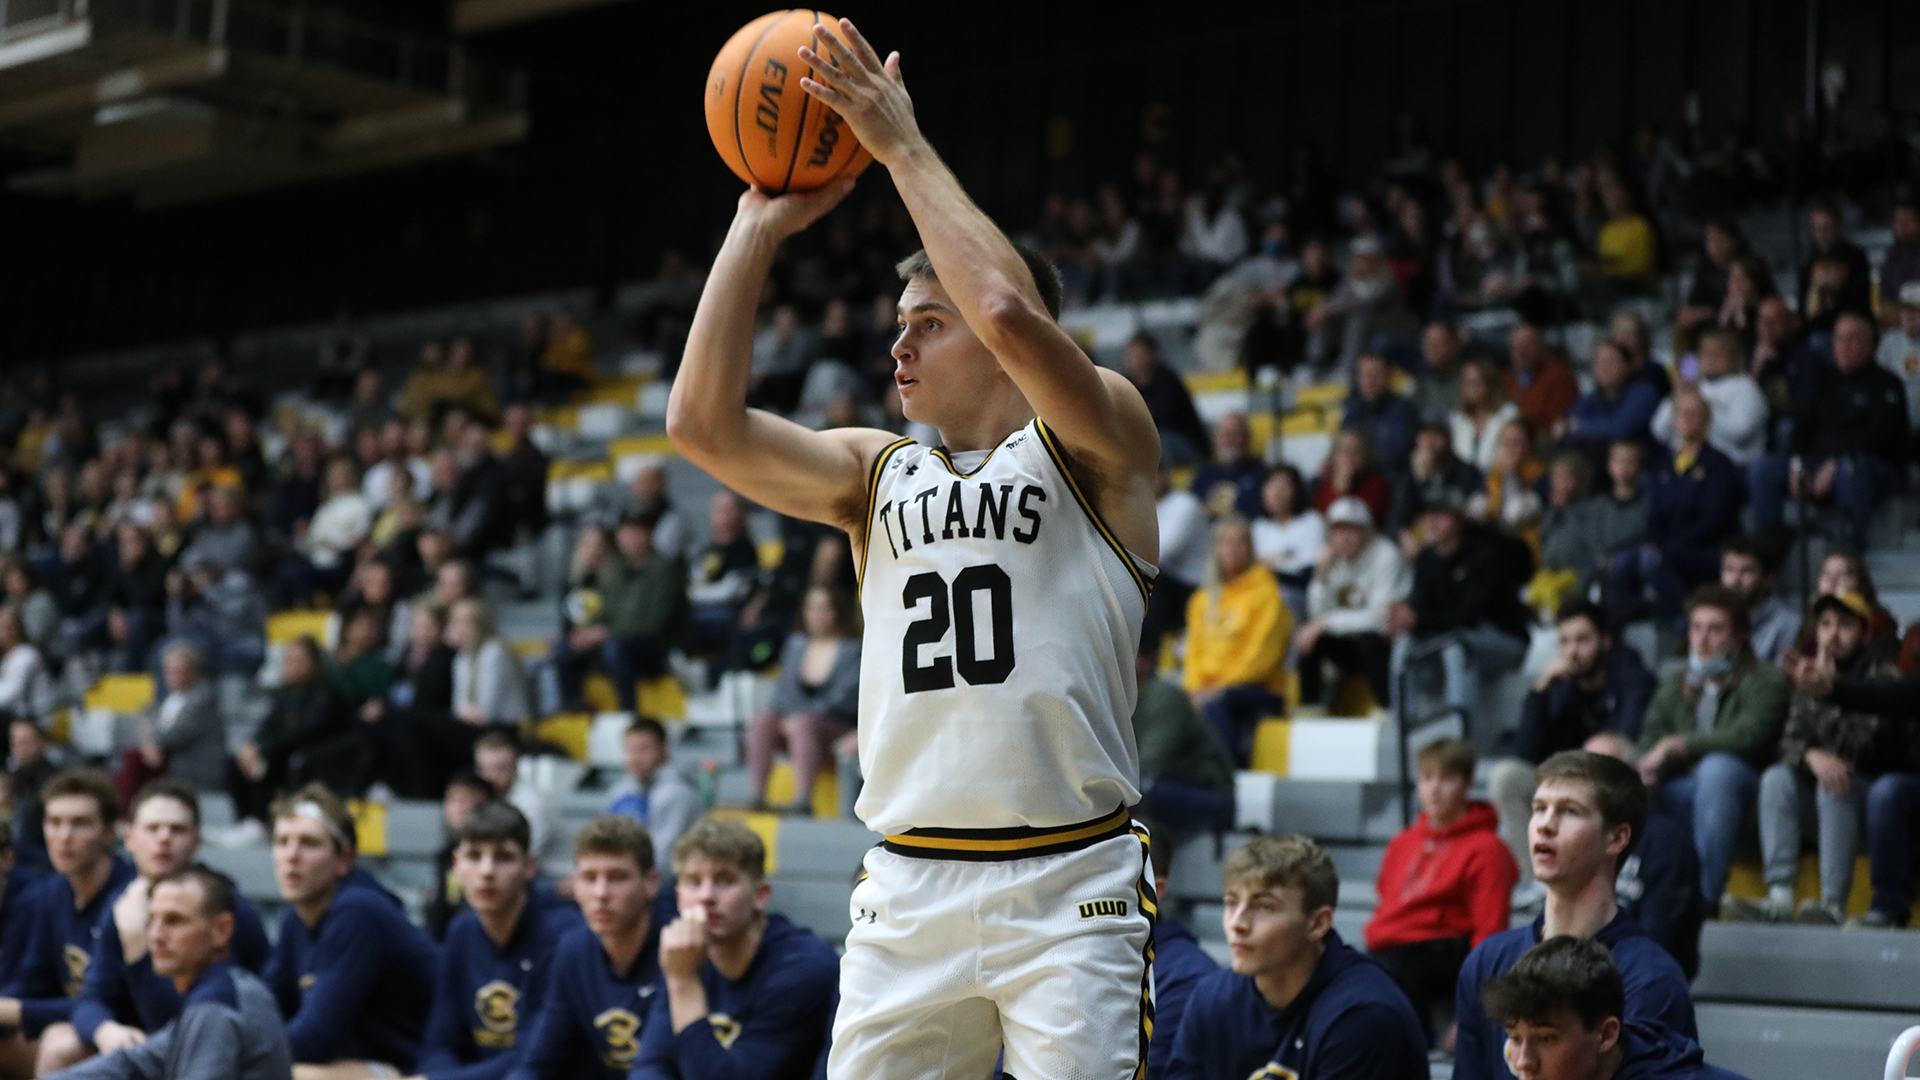 Quinn Steckbauer used a pair of 3-point baskets to score 10 points against the Blugolds.